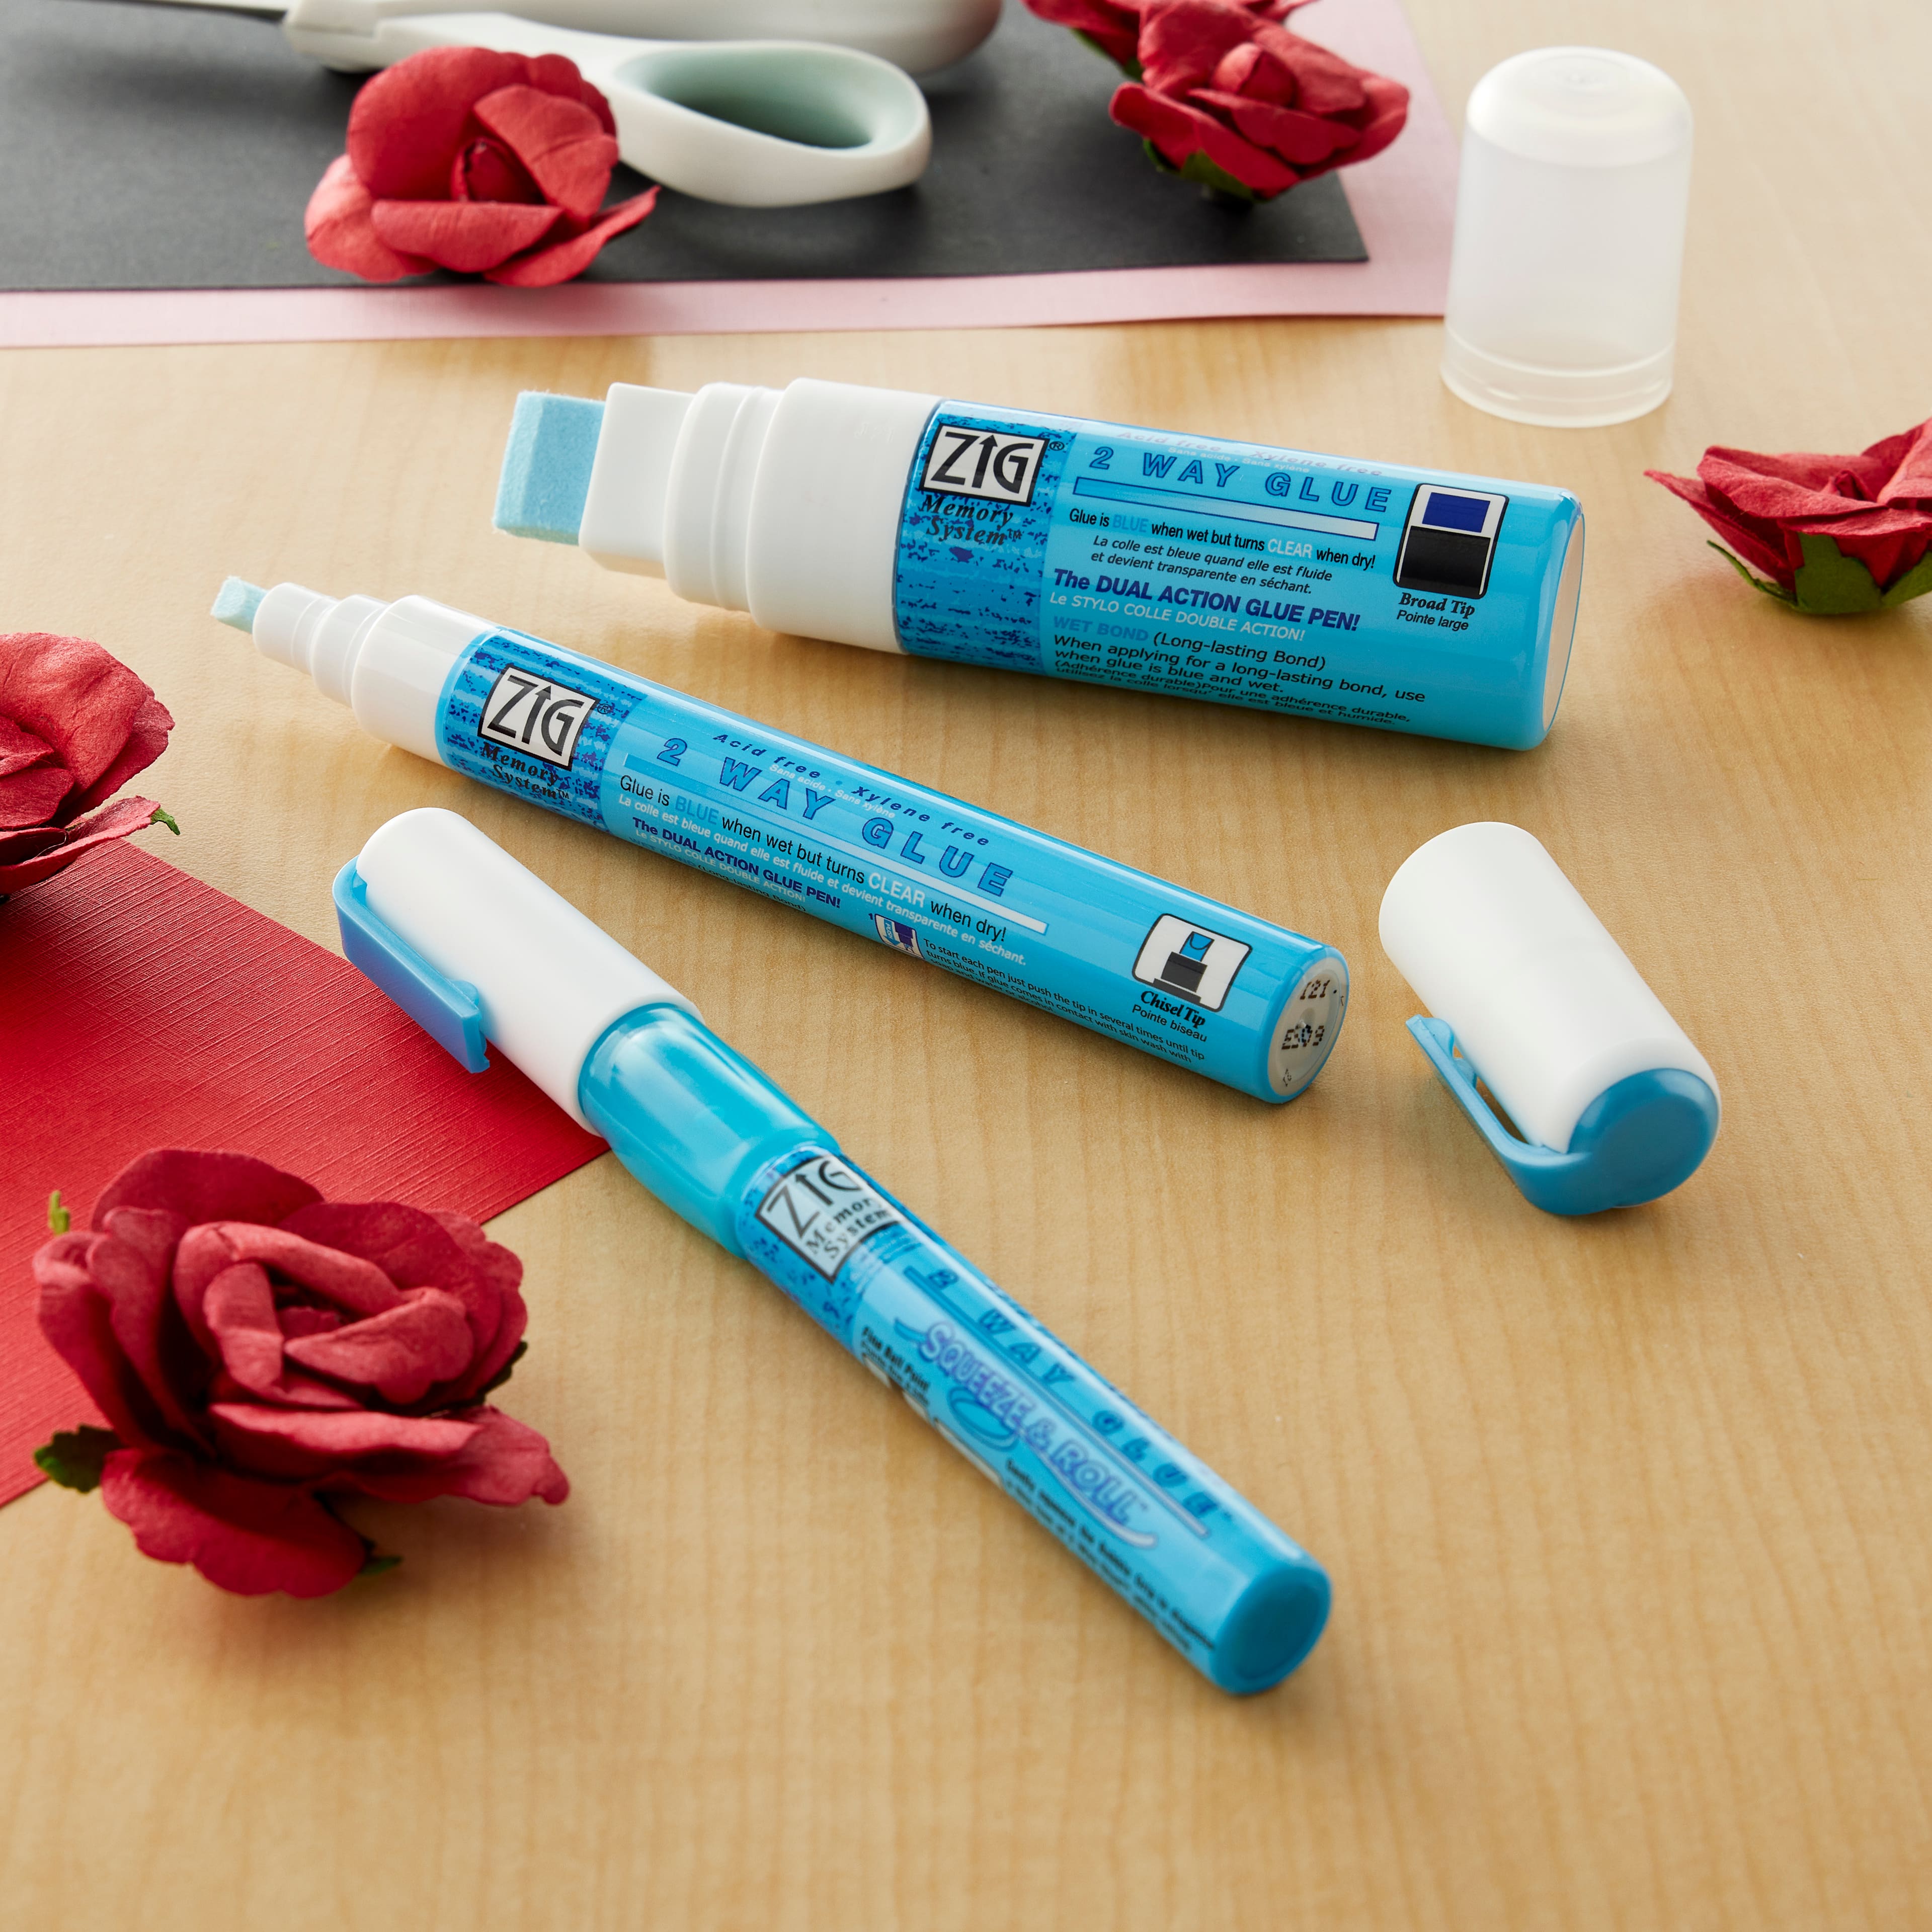 What are the differences between the 4 types of Zig-2 Way Glue Pens? 